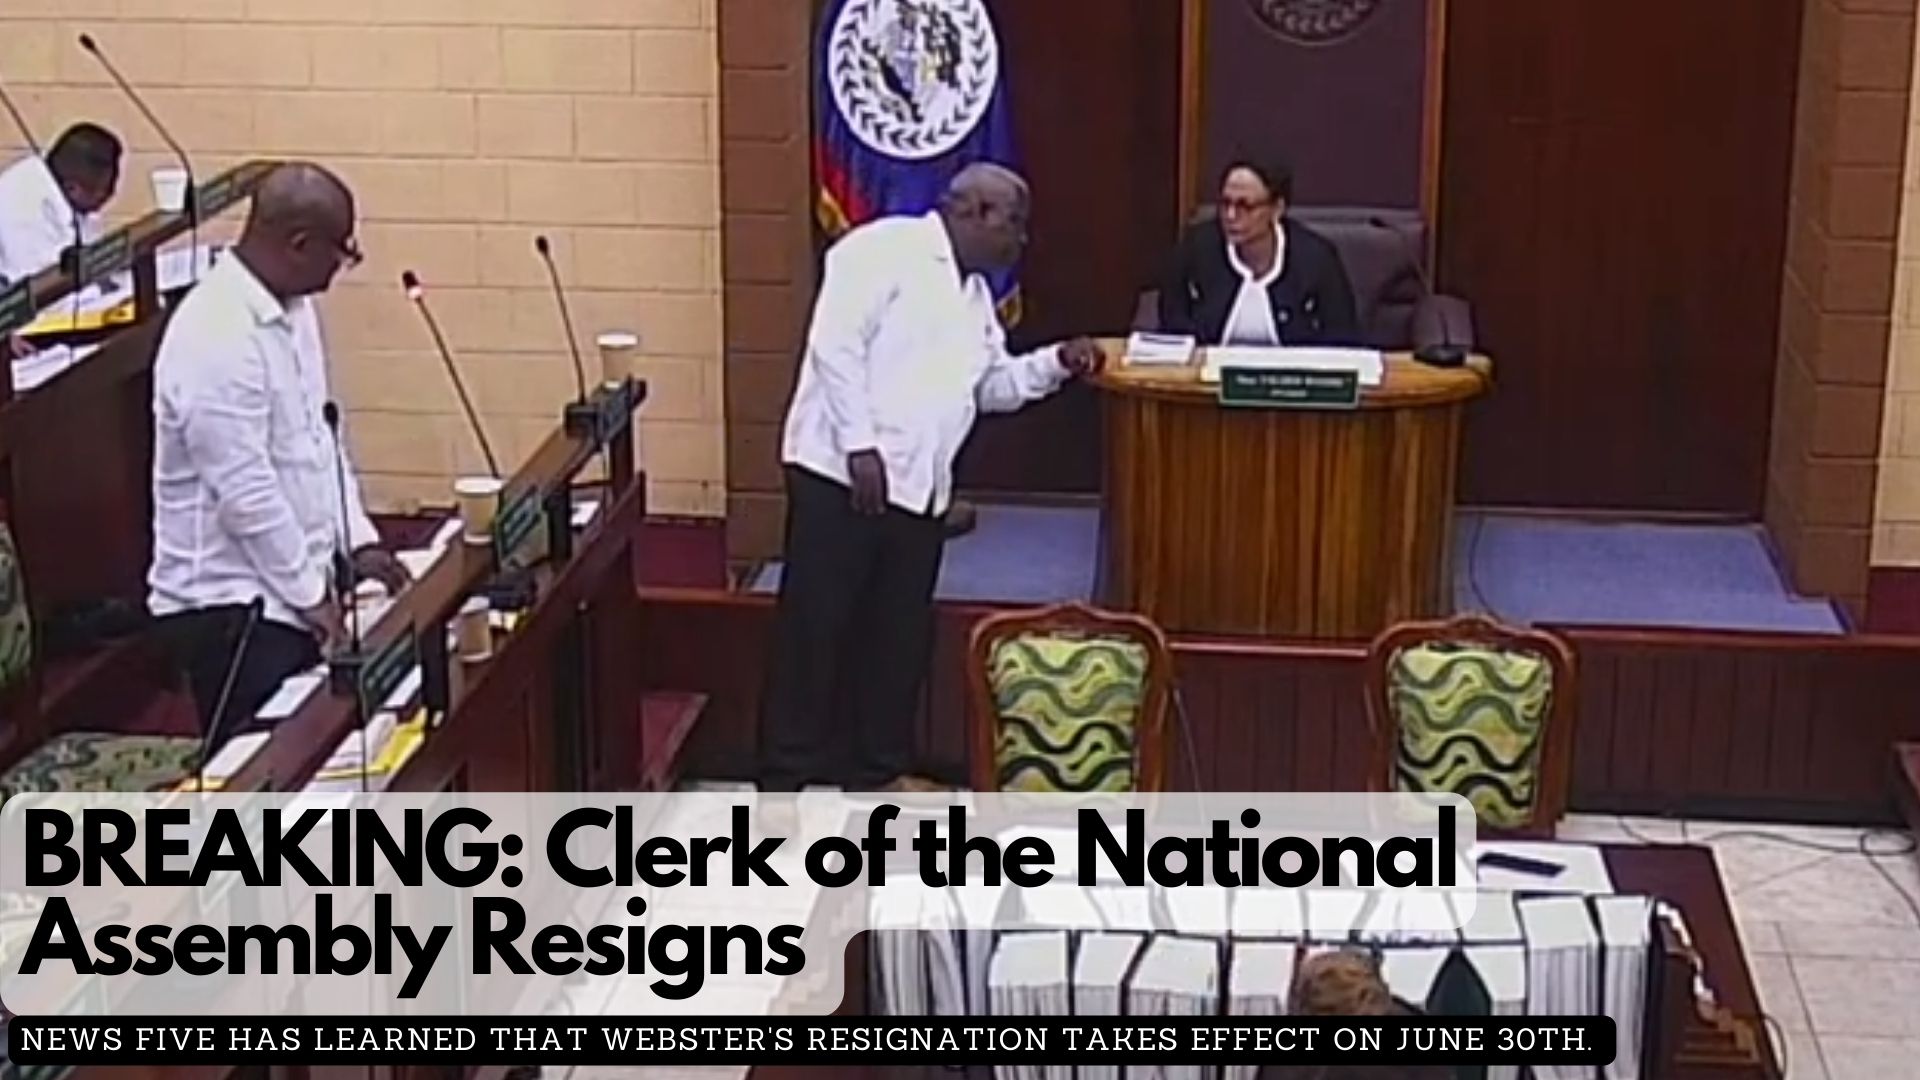 BREAKING: Clerk of the National Assembly Resigns